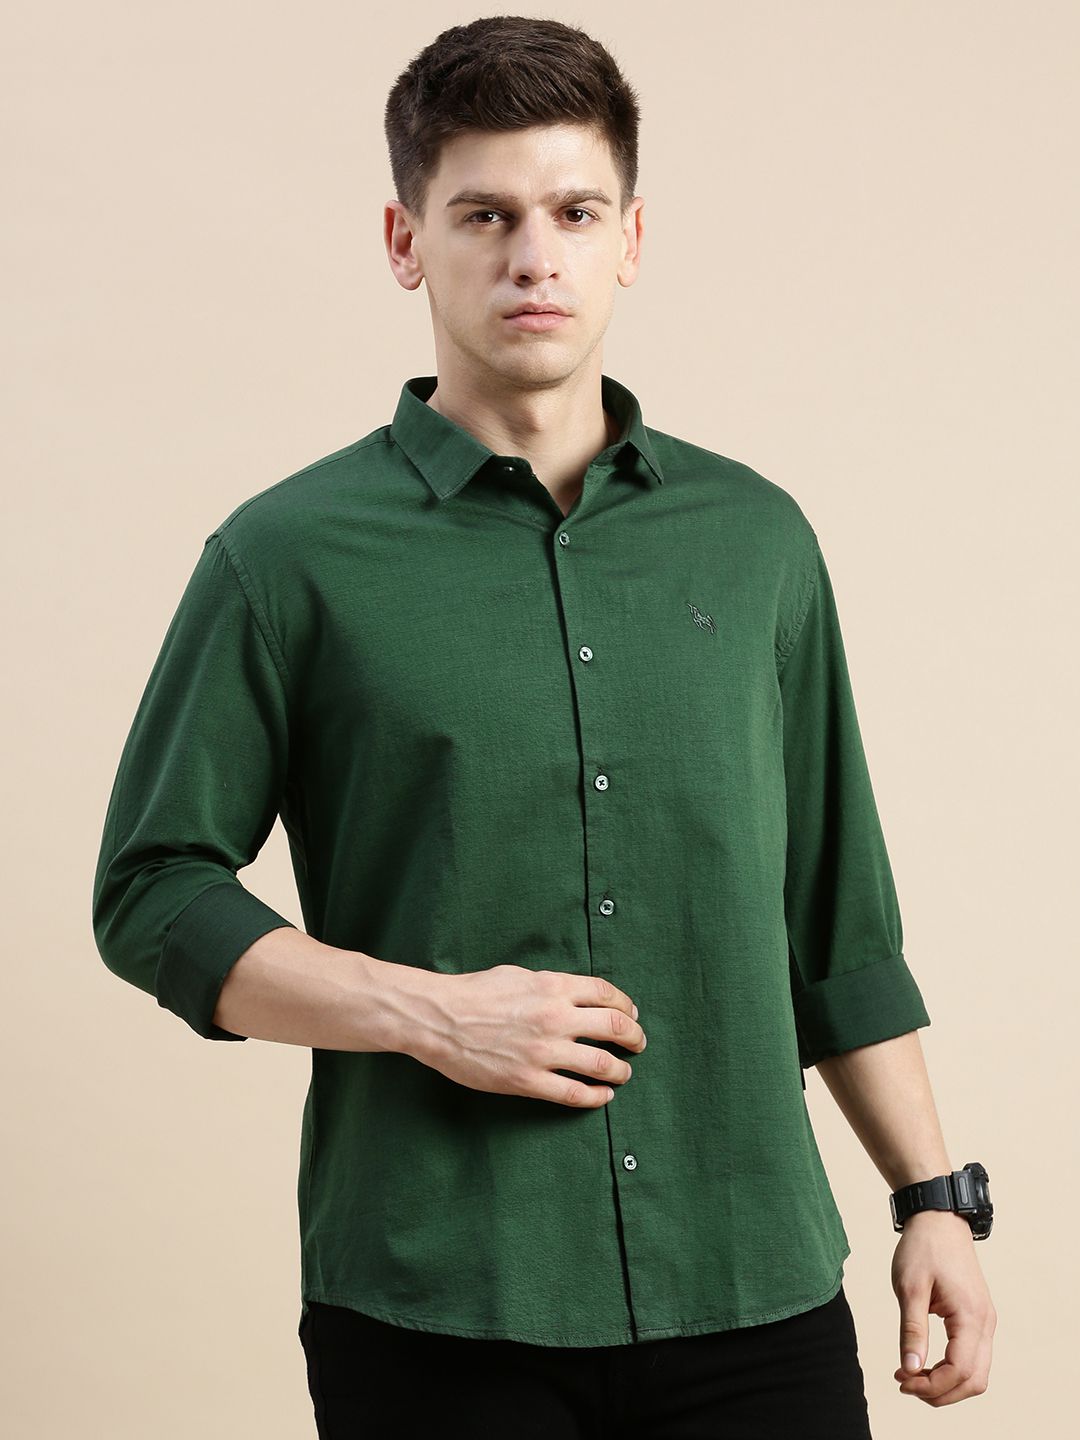     			Showoff Cotton Blend Regular Fit Solids Full Sleeves Men's Casual Shirt - Green ( Pack of 1 )